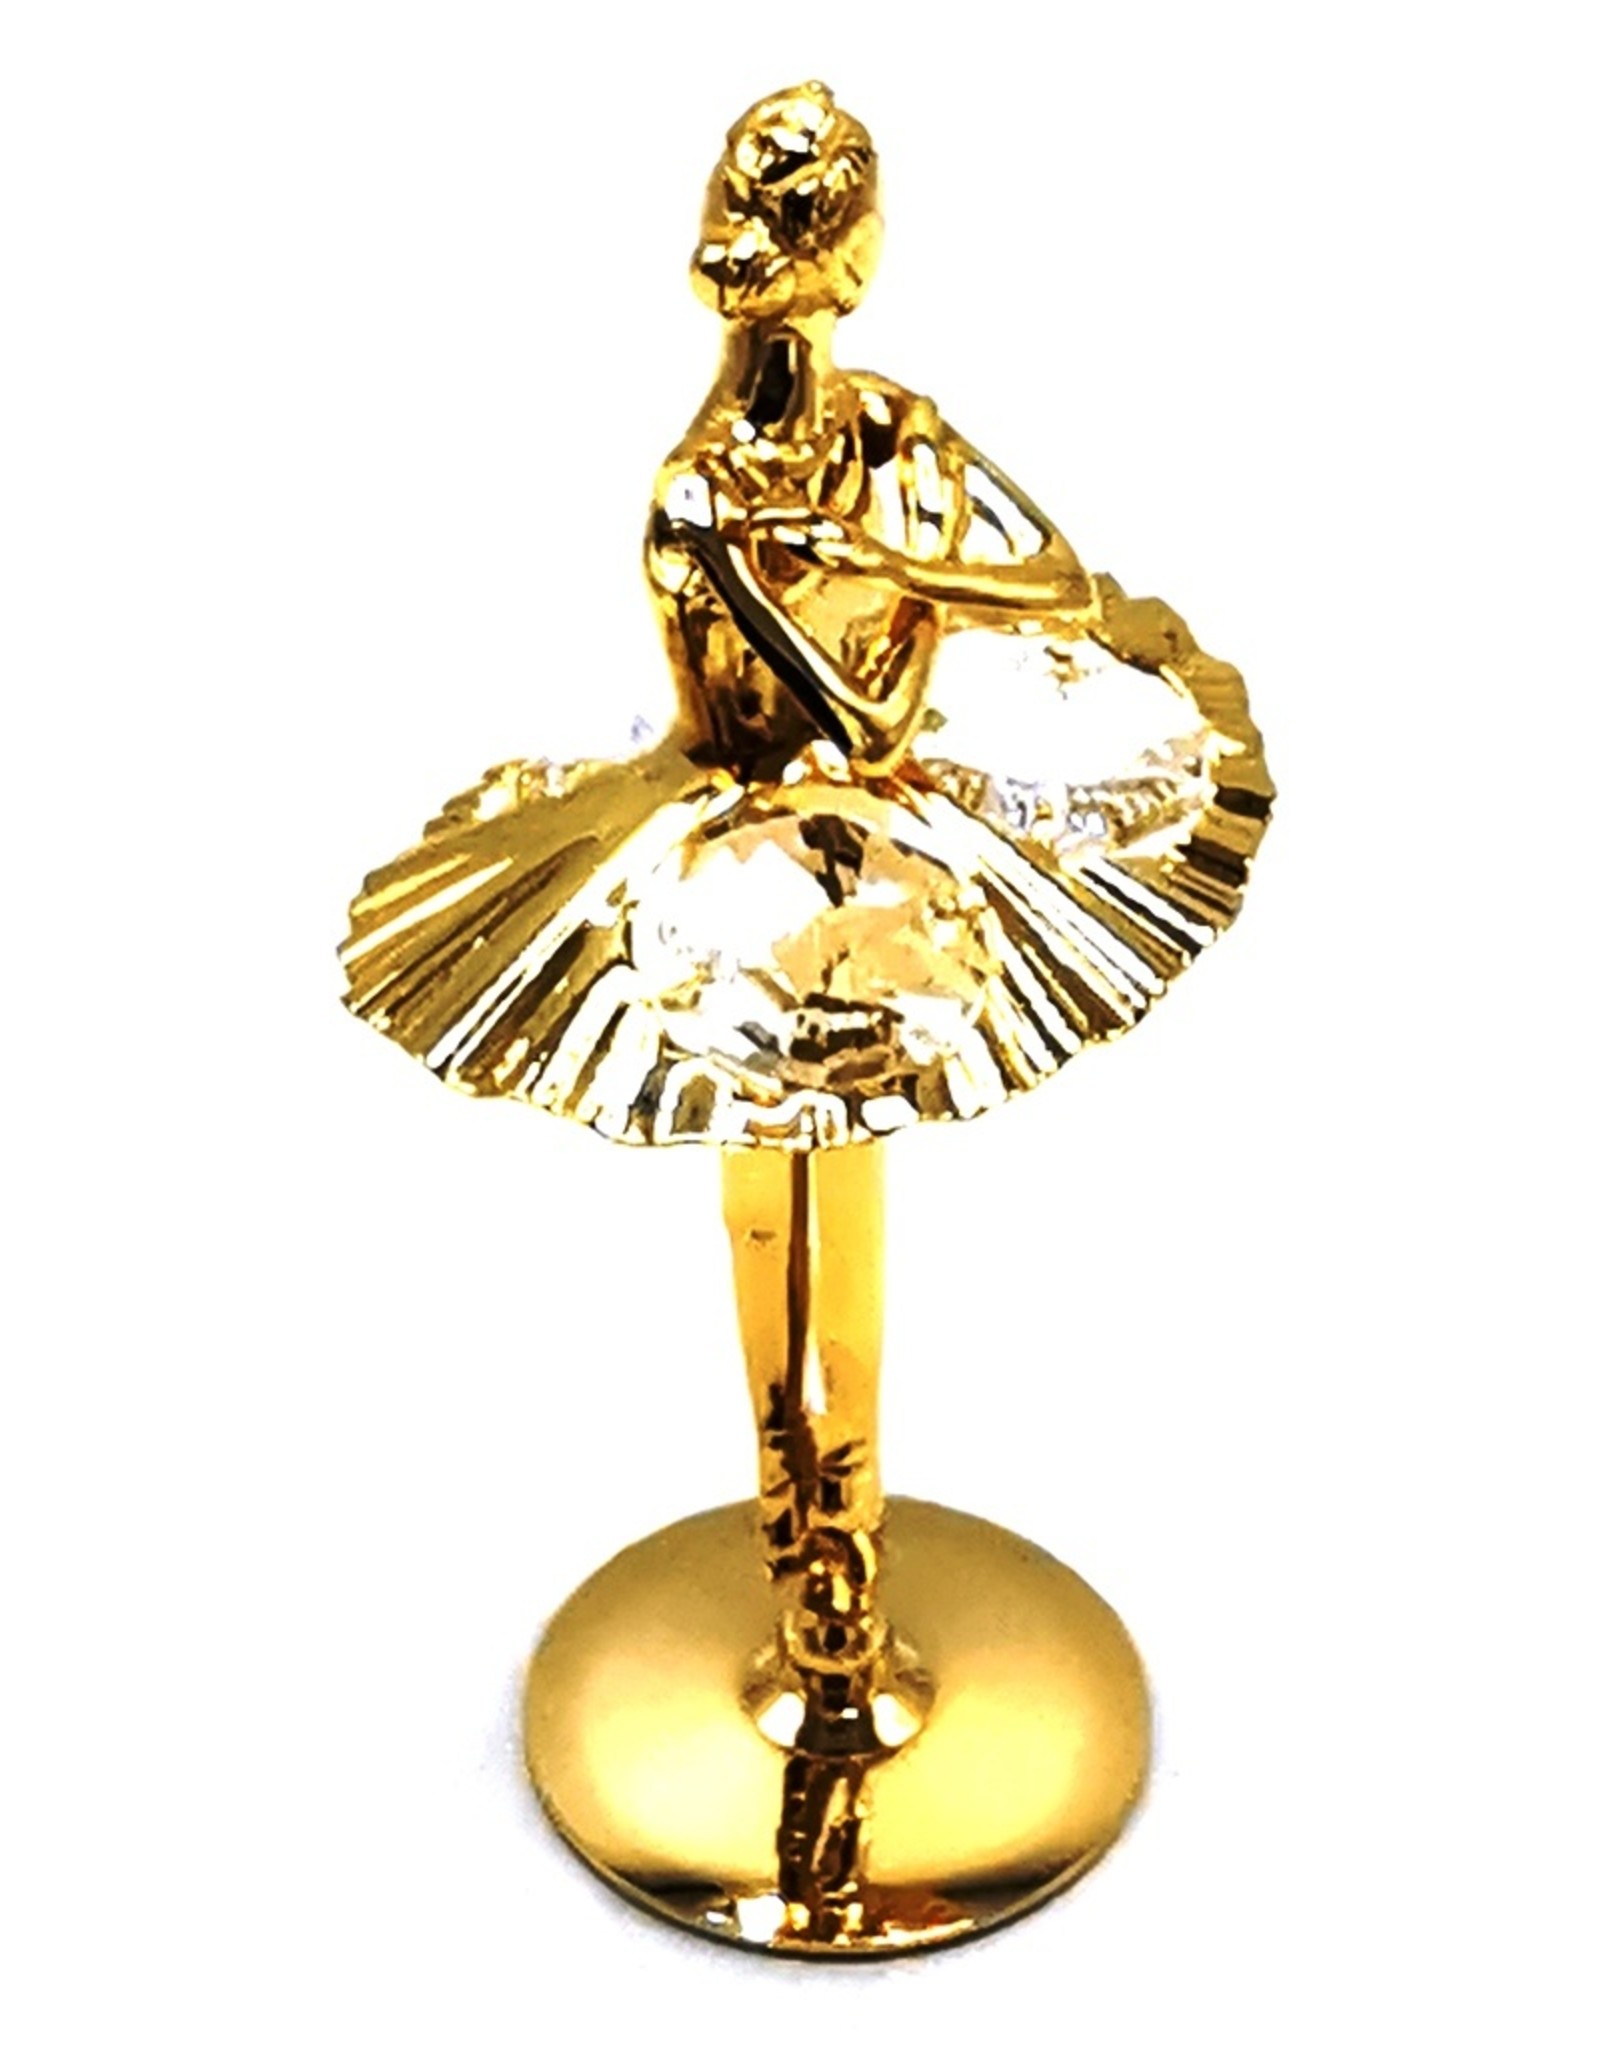 Crystal Temptations Miscellaneous - Miniature Ballet Dancer Gilded with Swarovski